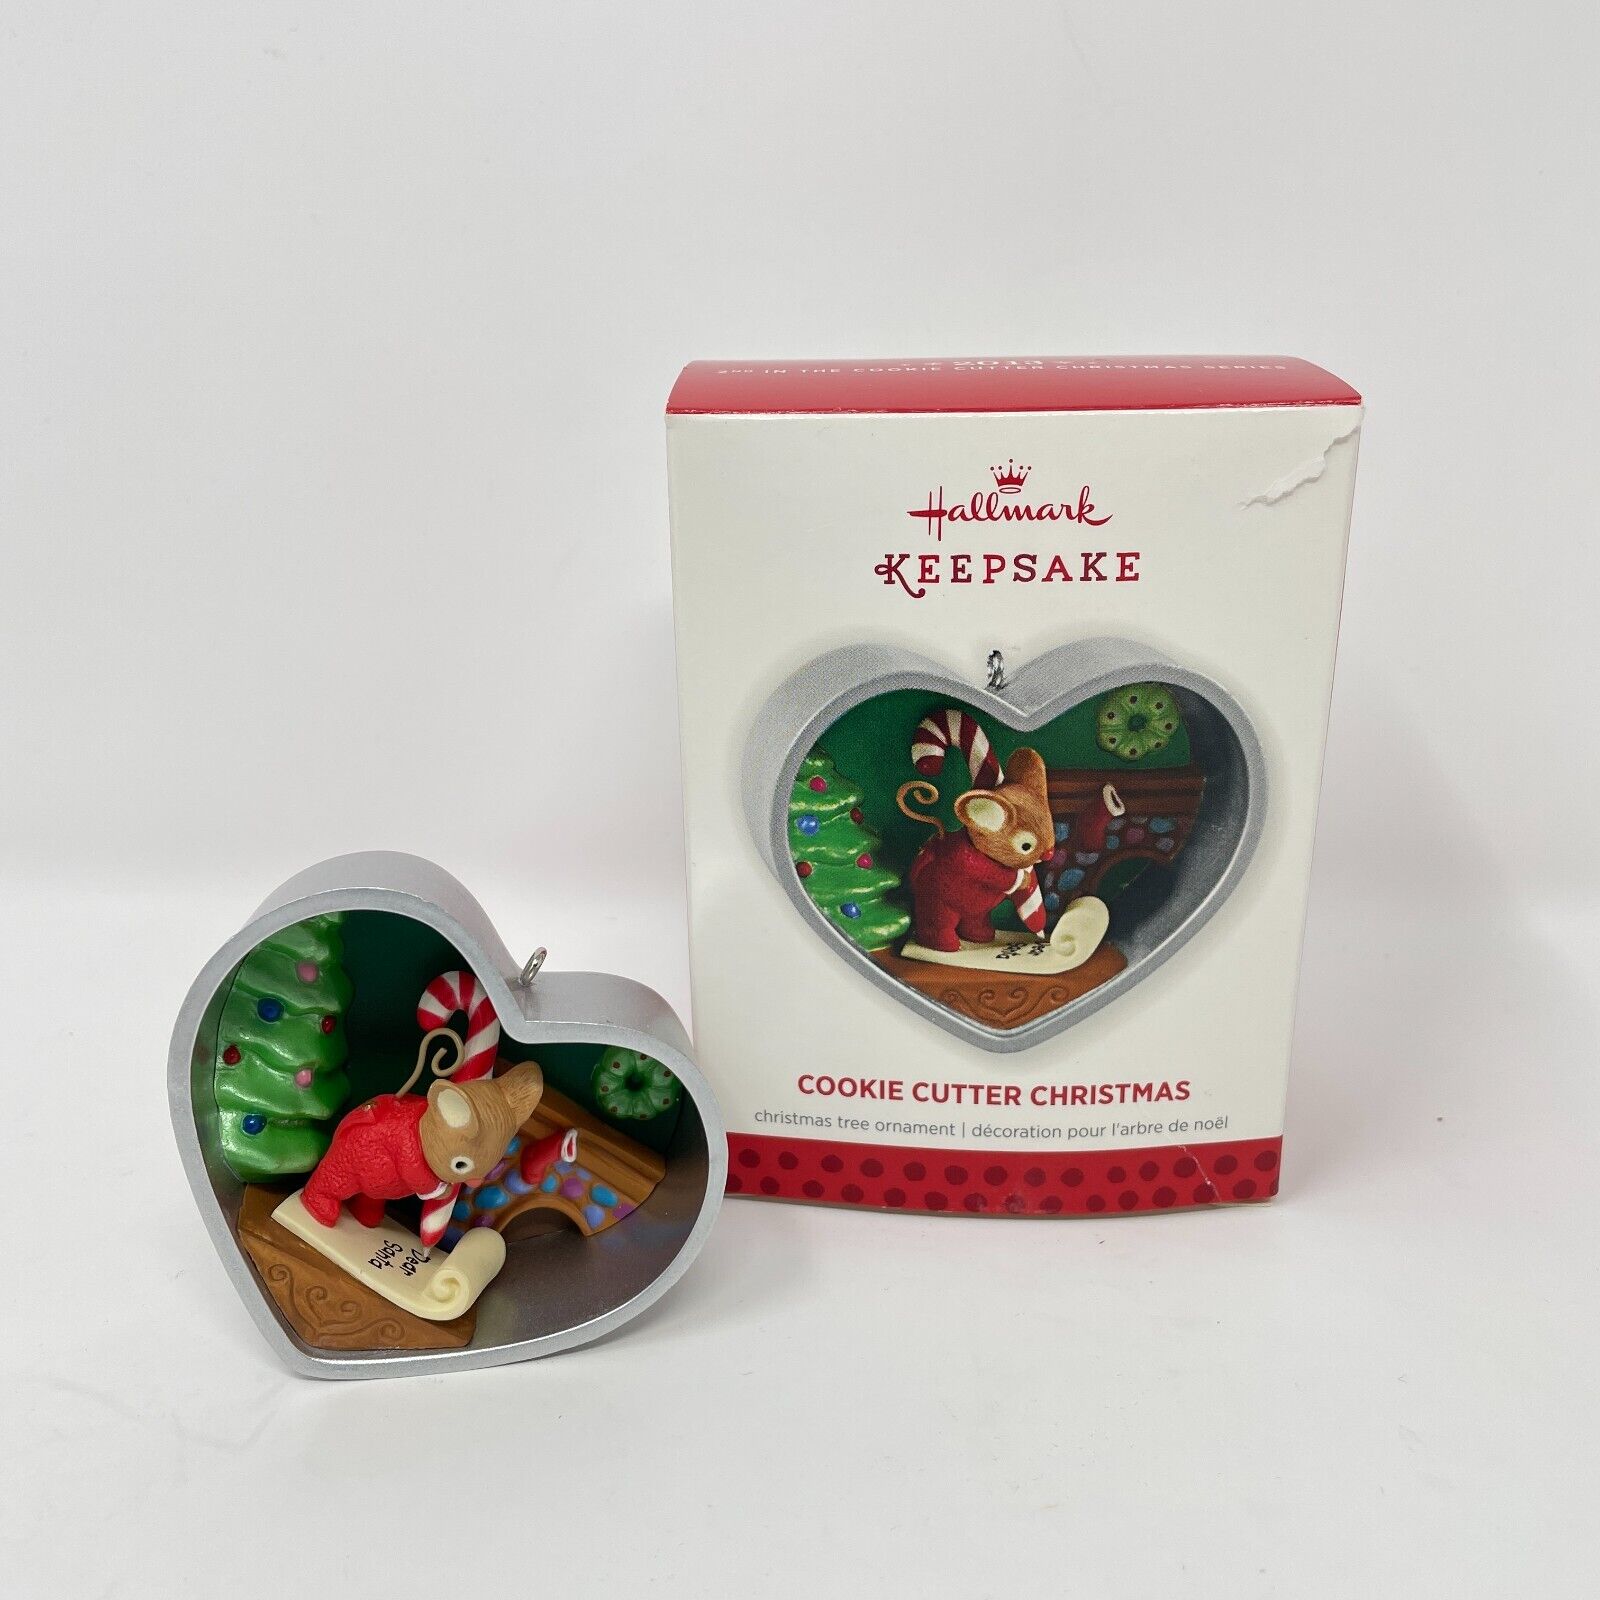 Hallmark Keepsake Ornament 2013 Cookie Cutter Christmas 2nd In Series Mouse SDB